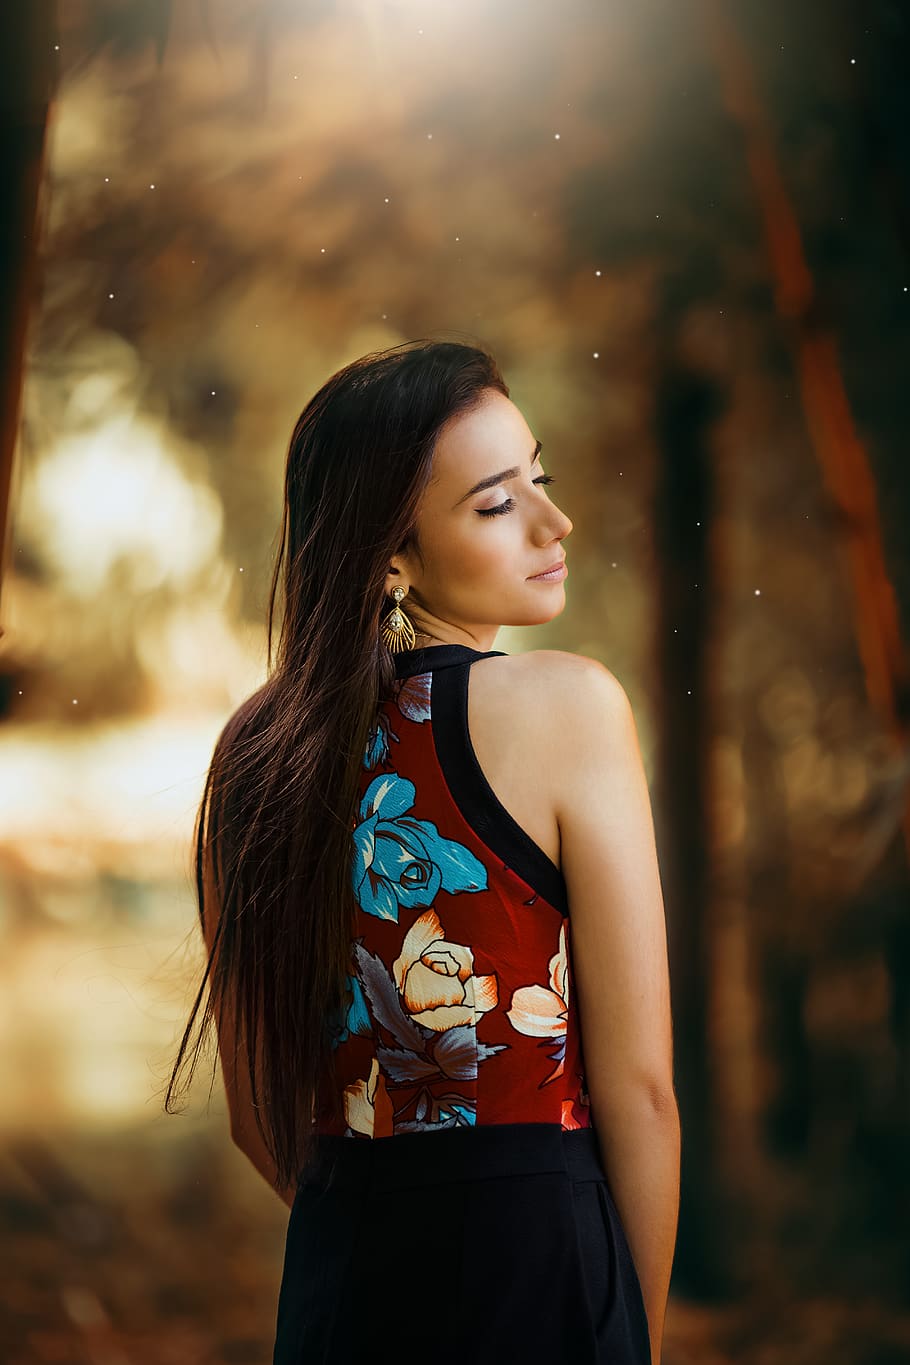 Woman Wearing Floral Top, attractive, beautiful, beauty, blur